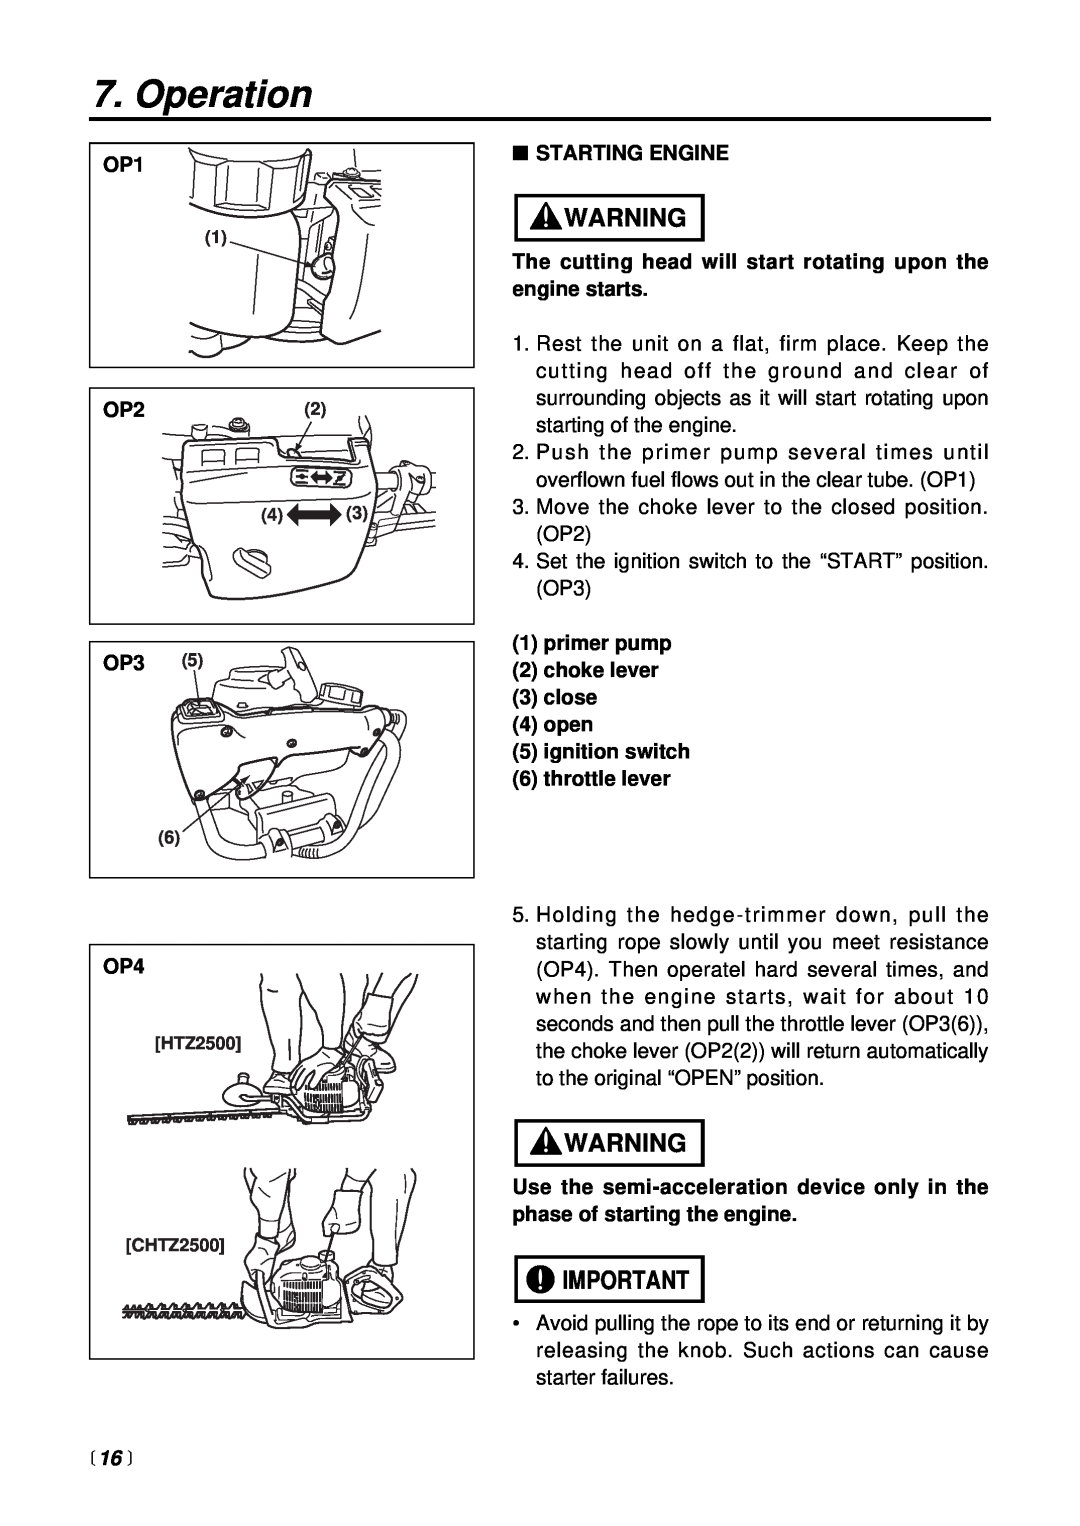 RedMax HTZ2500 manual Operation,  16 , OP22, Starting Engine, The cutting head will start rotating upon the engine starts 